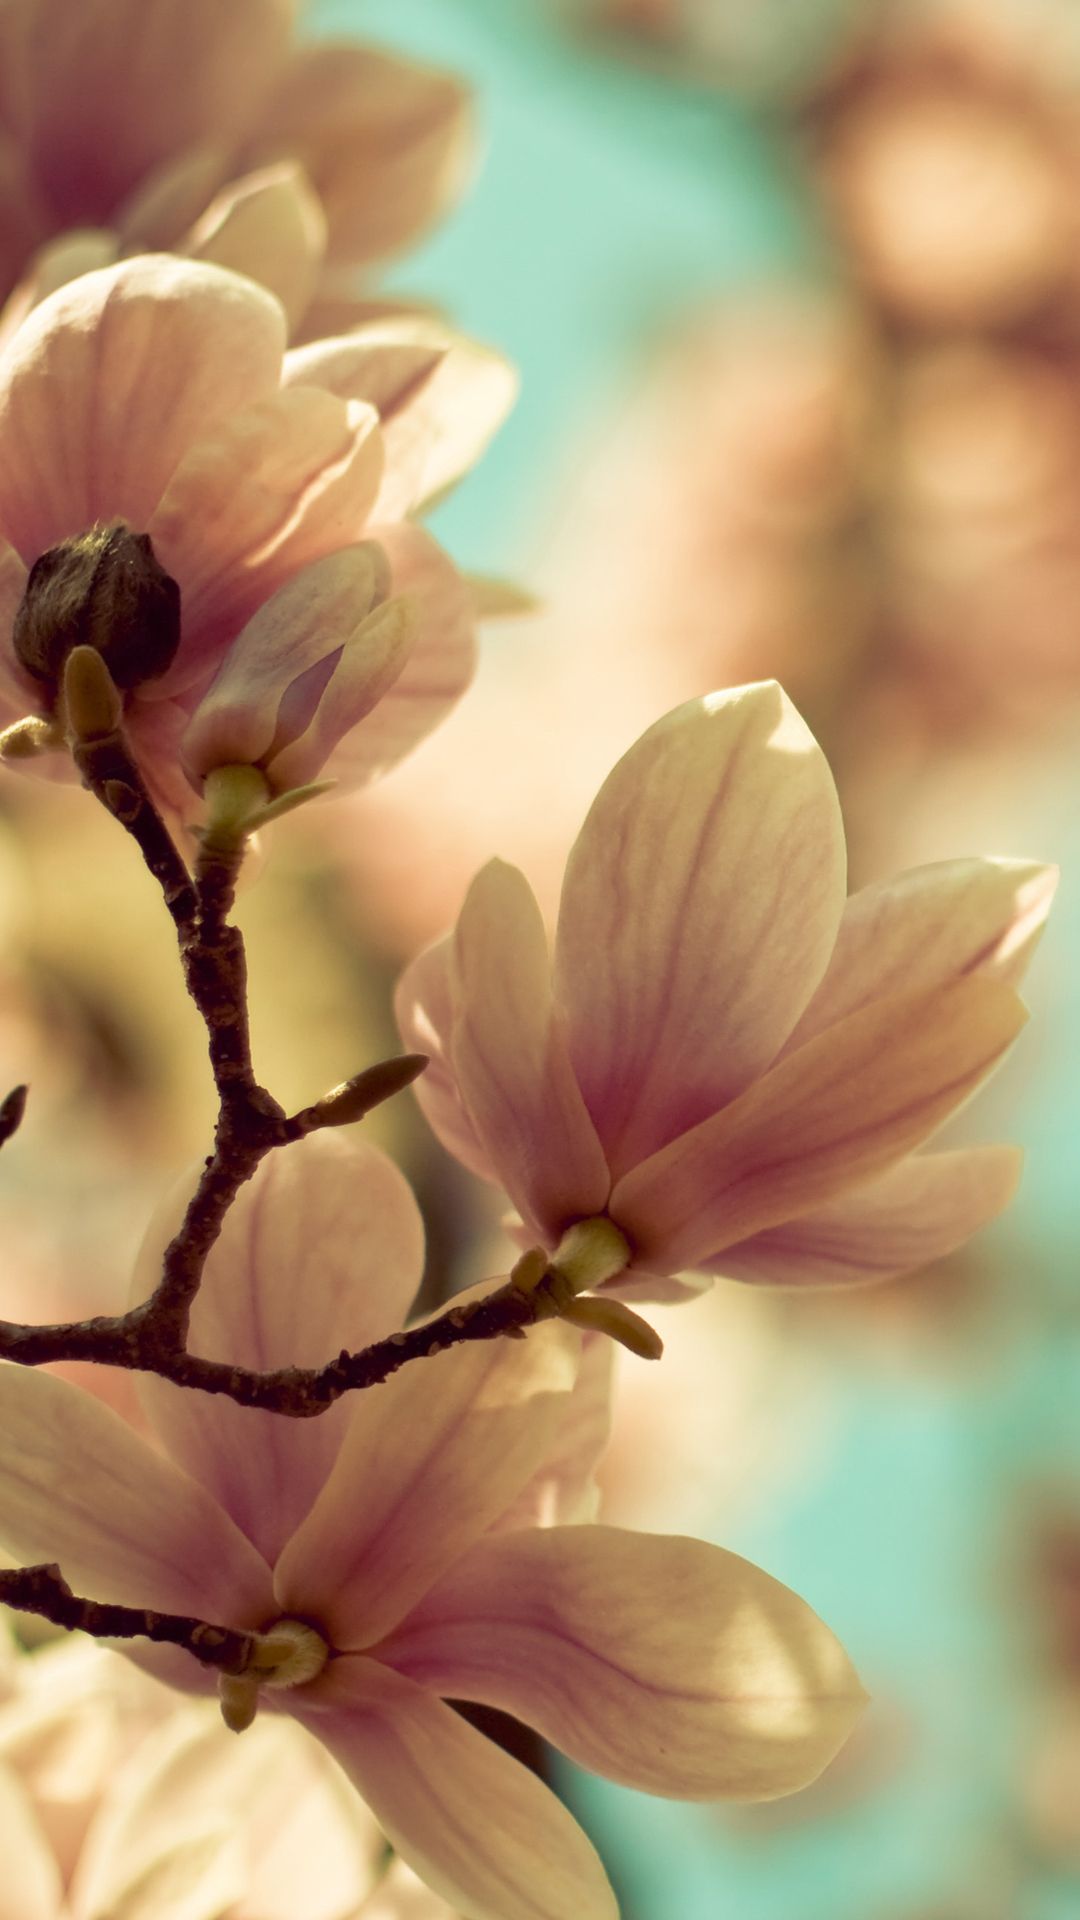 Spring Flowers Blossom Samsung Android Wallpaper free download